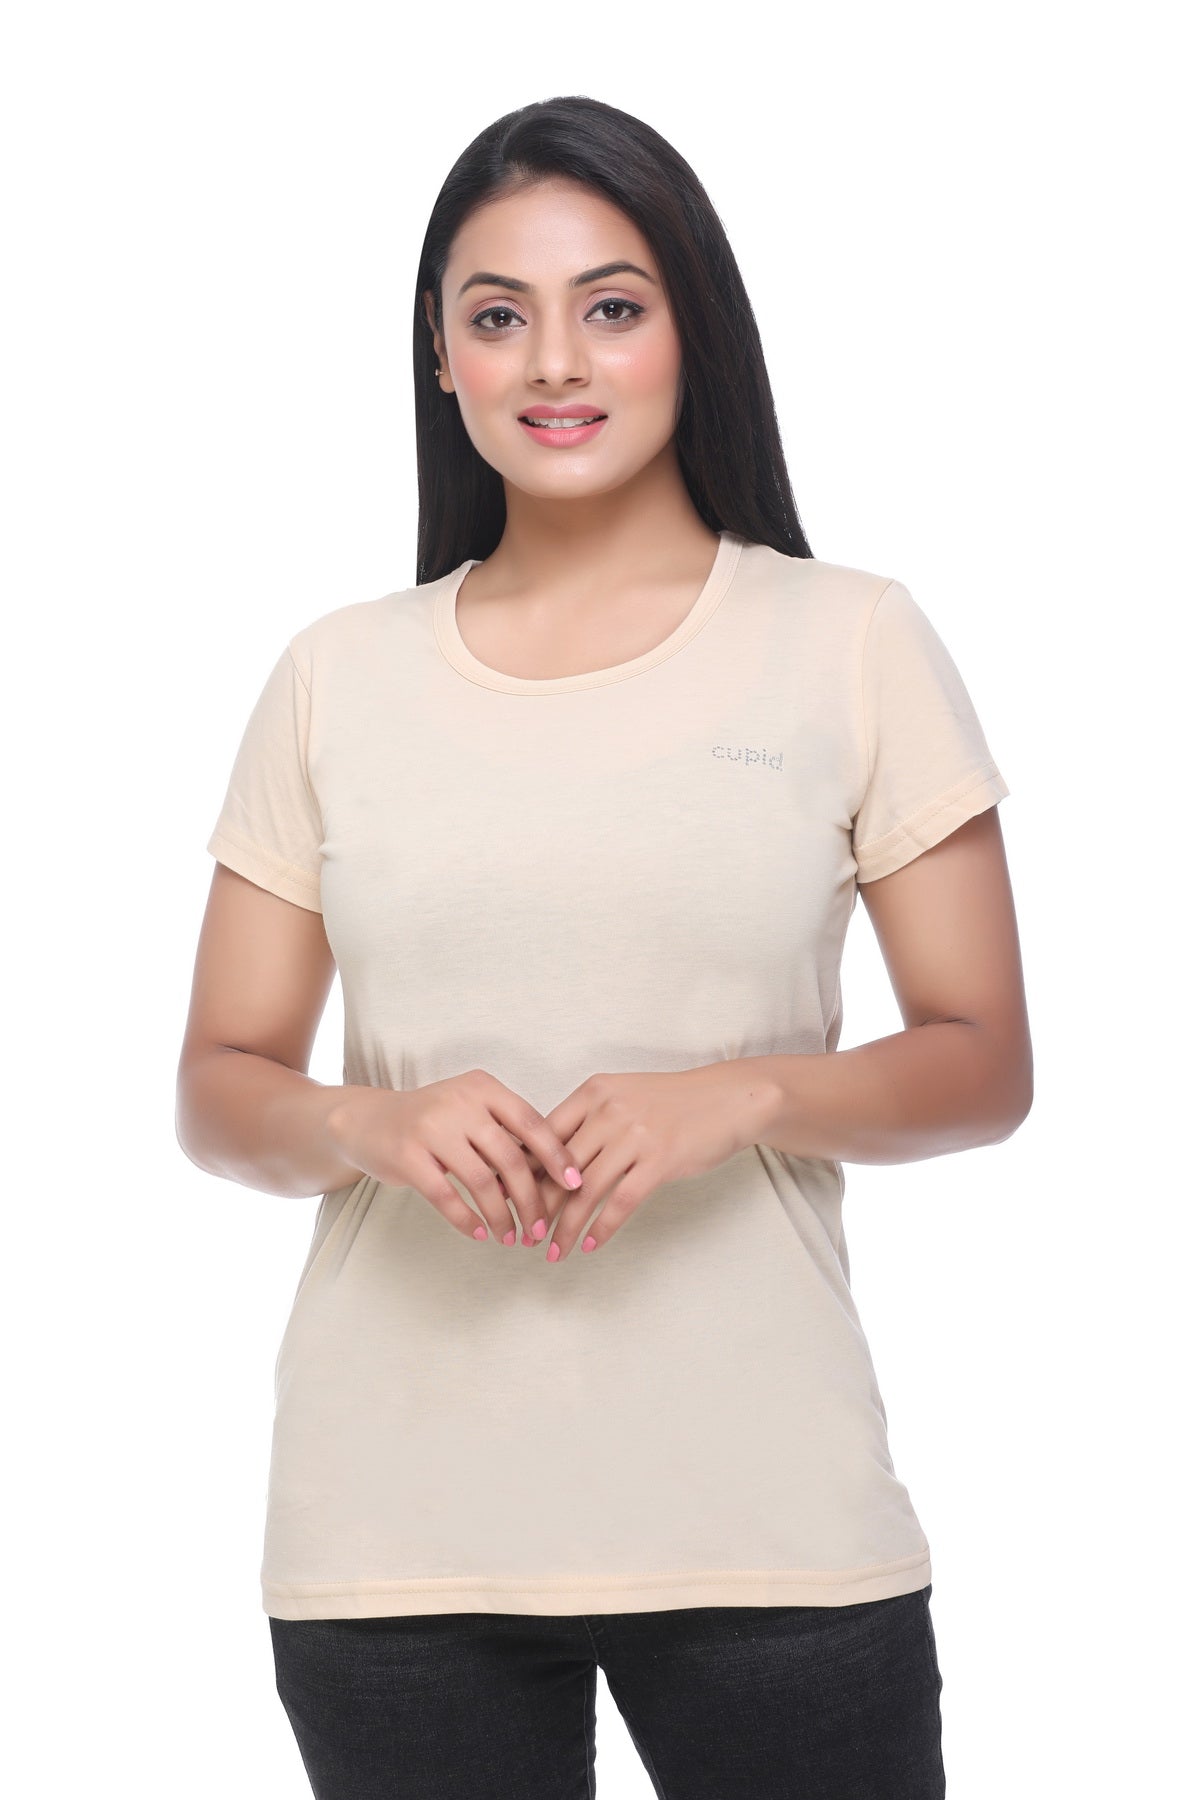 CUPID Round Neck Summers Plain Cotton T-Shirt Women/Girls (Beige) freeshipping - Cupid Clothings